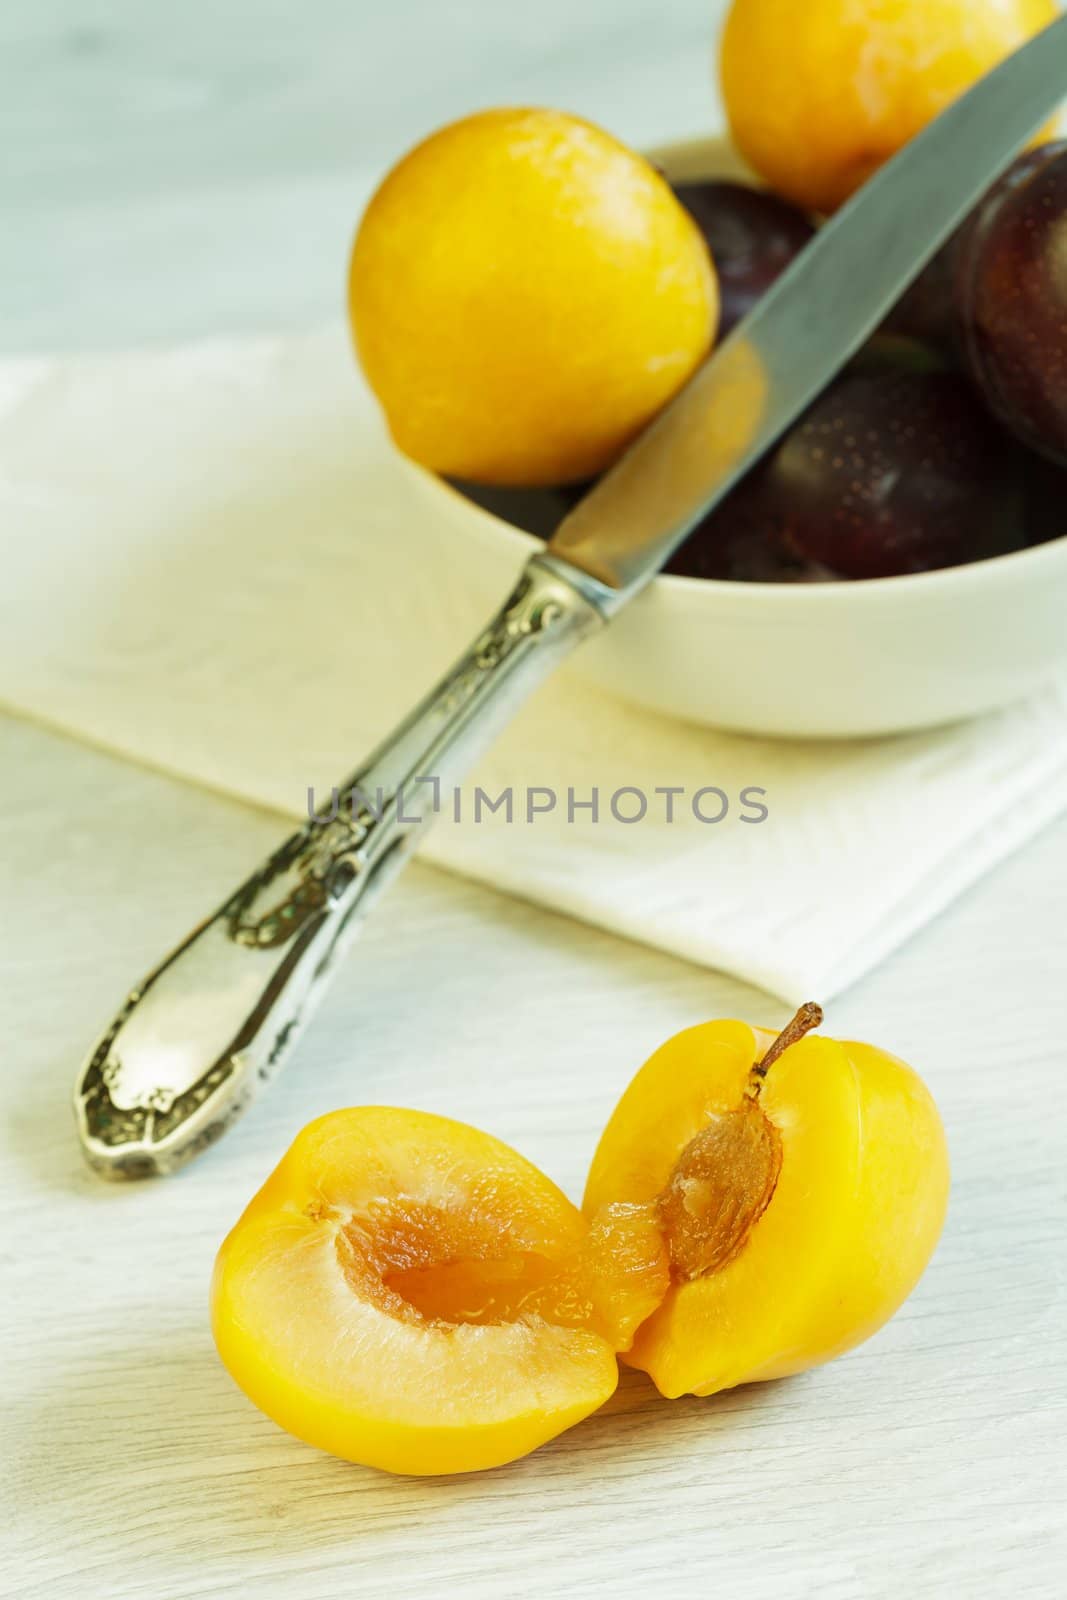 Cuted yellow plum and bowl with plums at the background